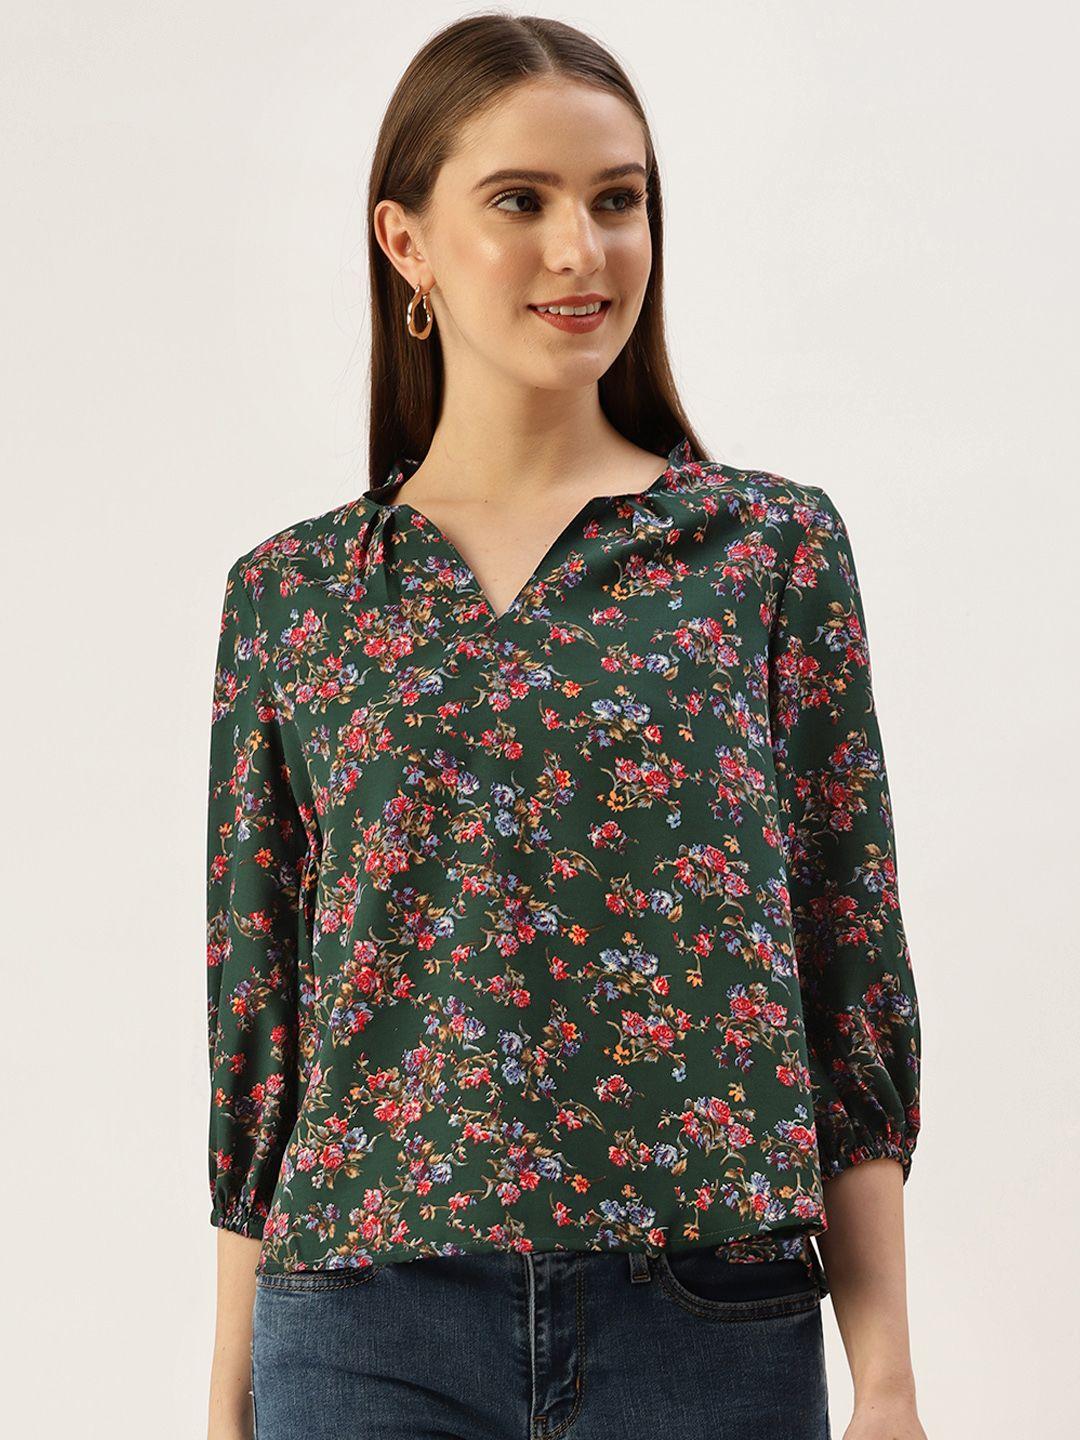 off-label-green-floral-top